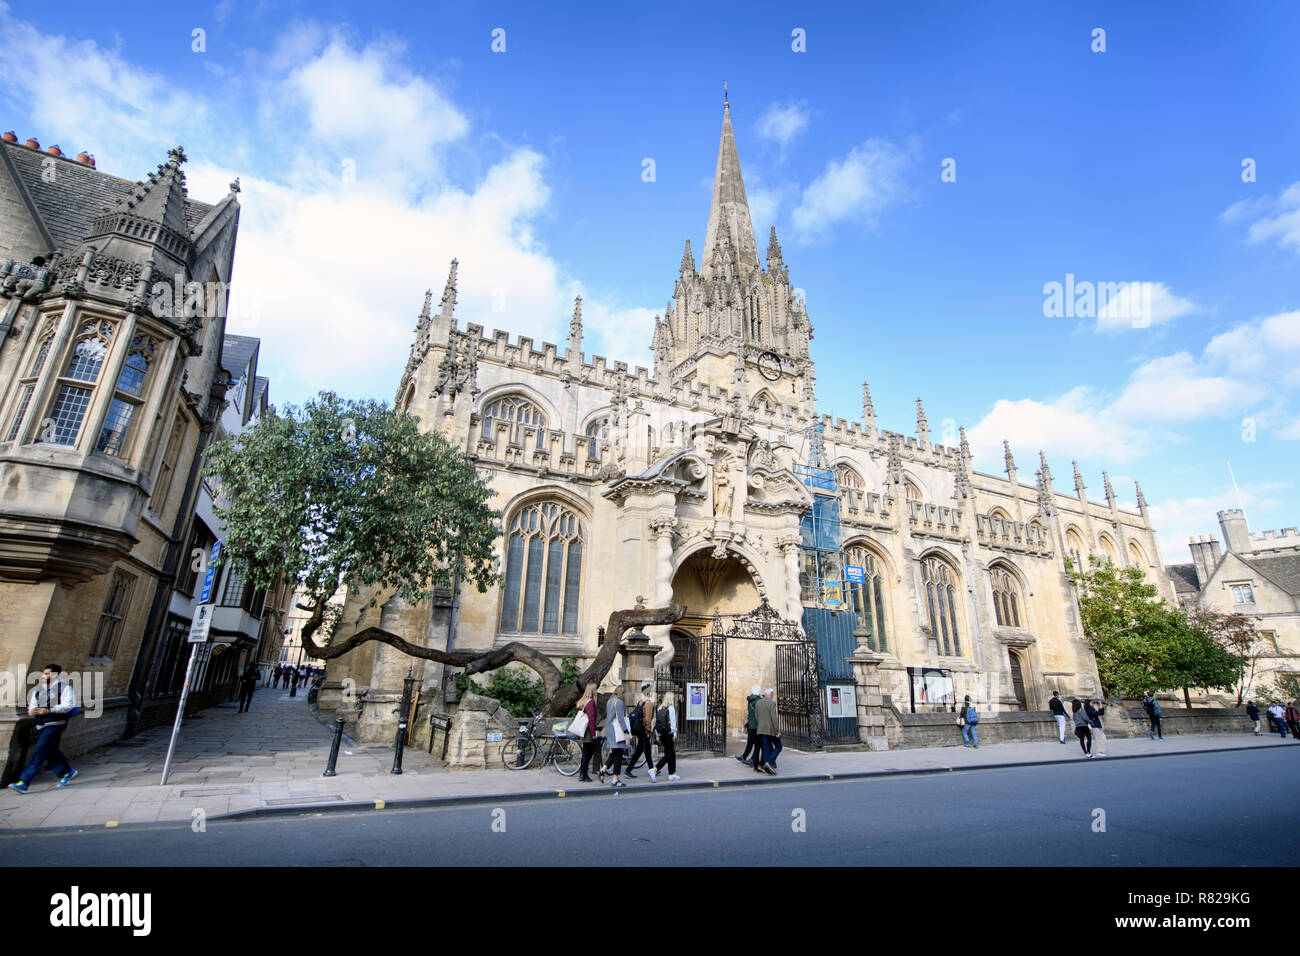 The University Church of St Mary the Virgin in Oxford, UK Stock Photo